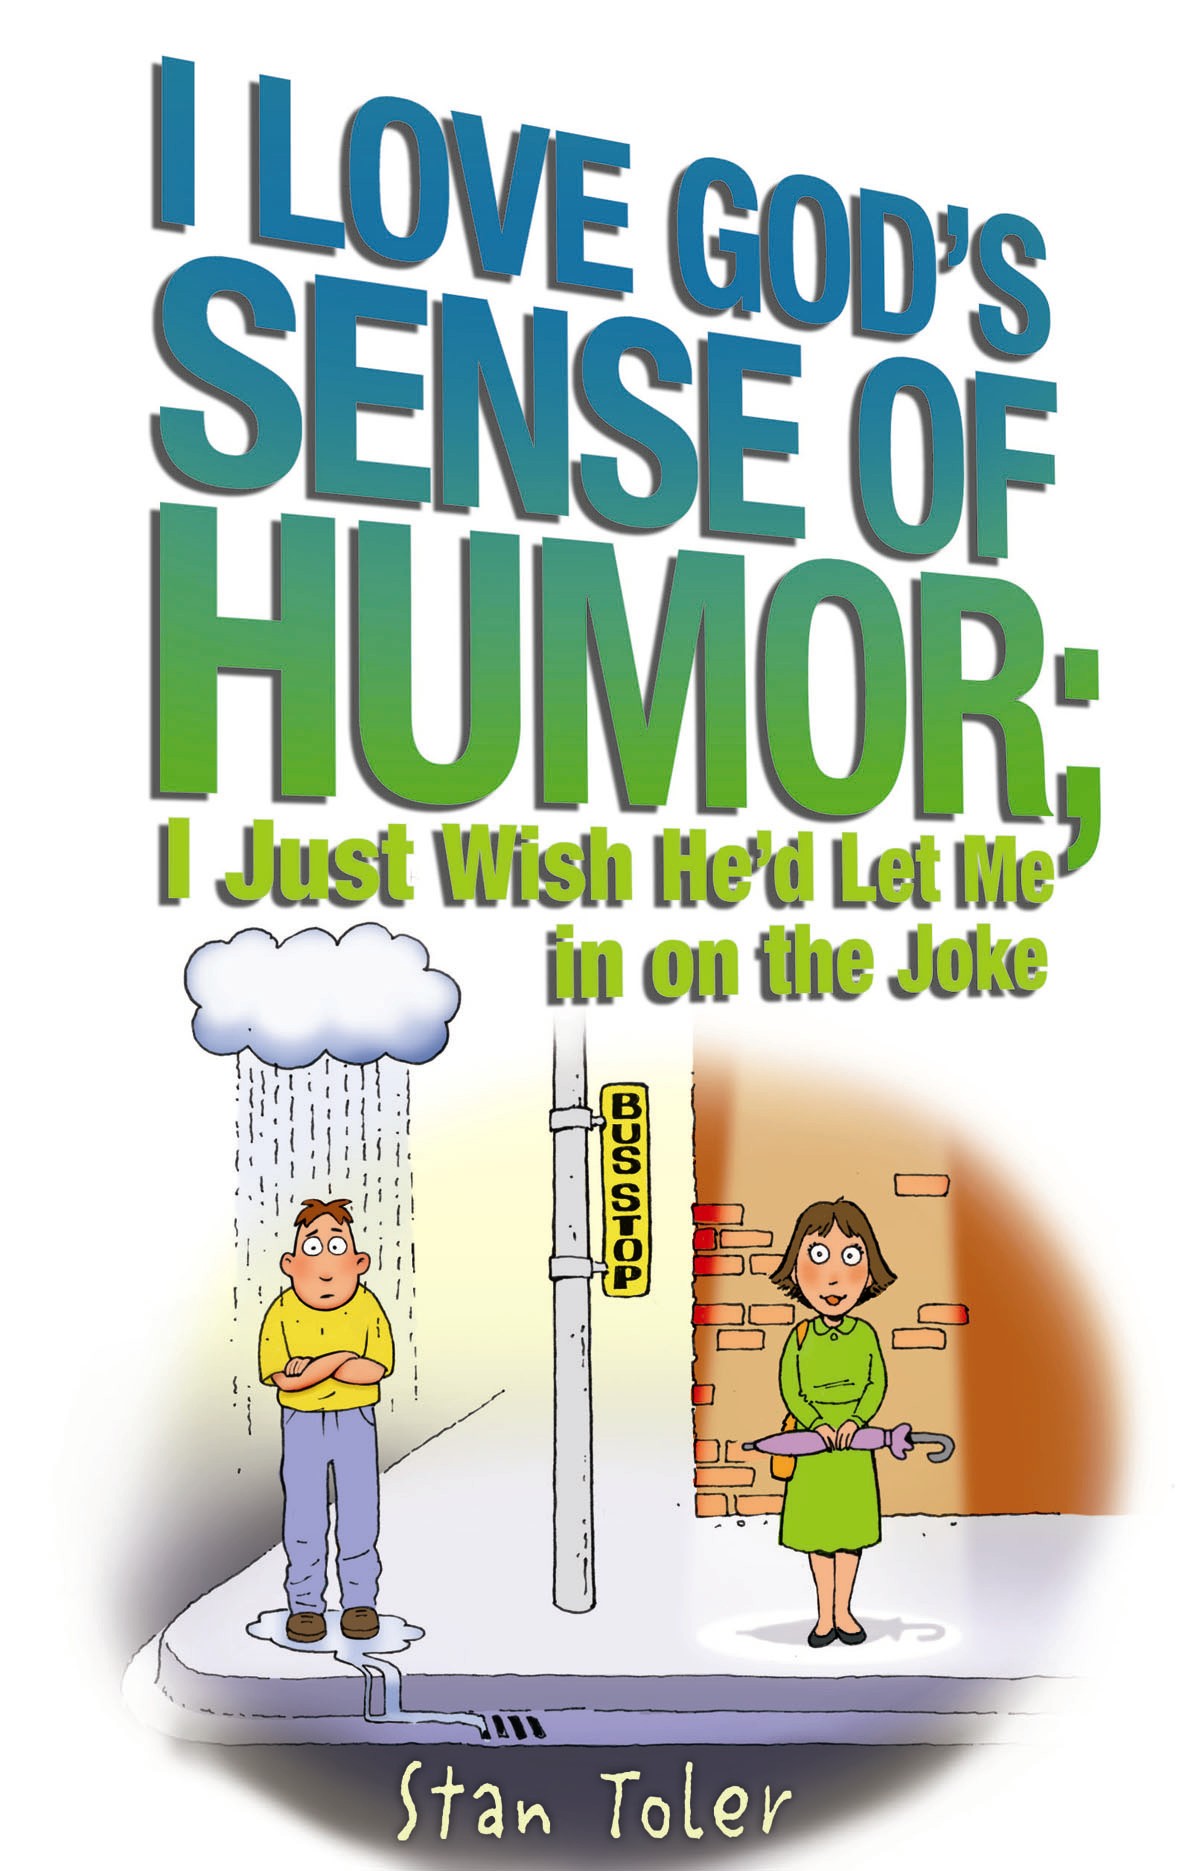 Does God Have a Sense of Humor? Best Selling Author Reveals God's Humor